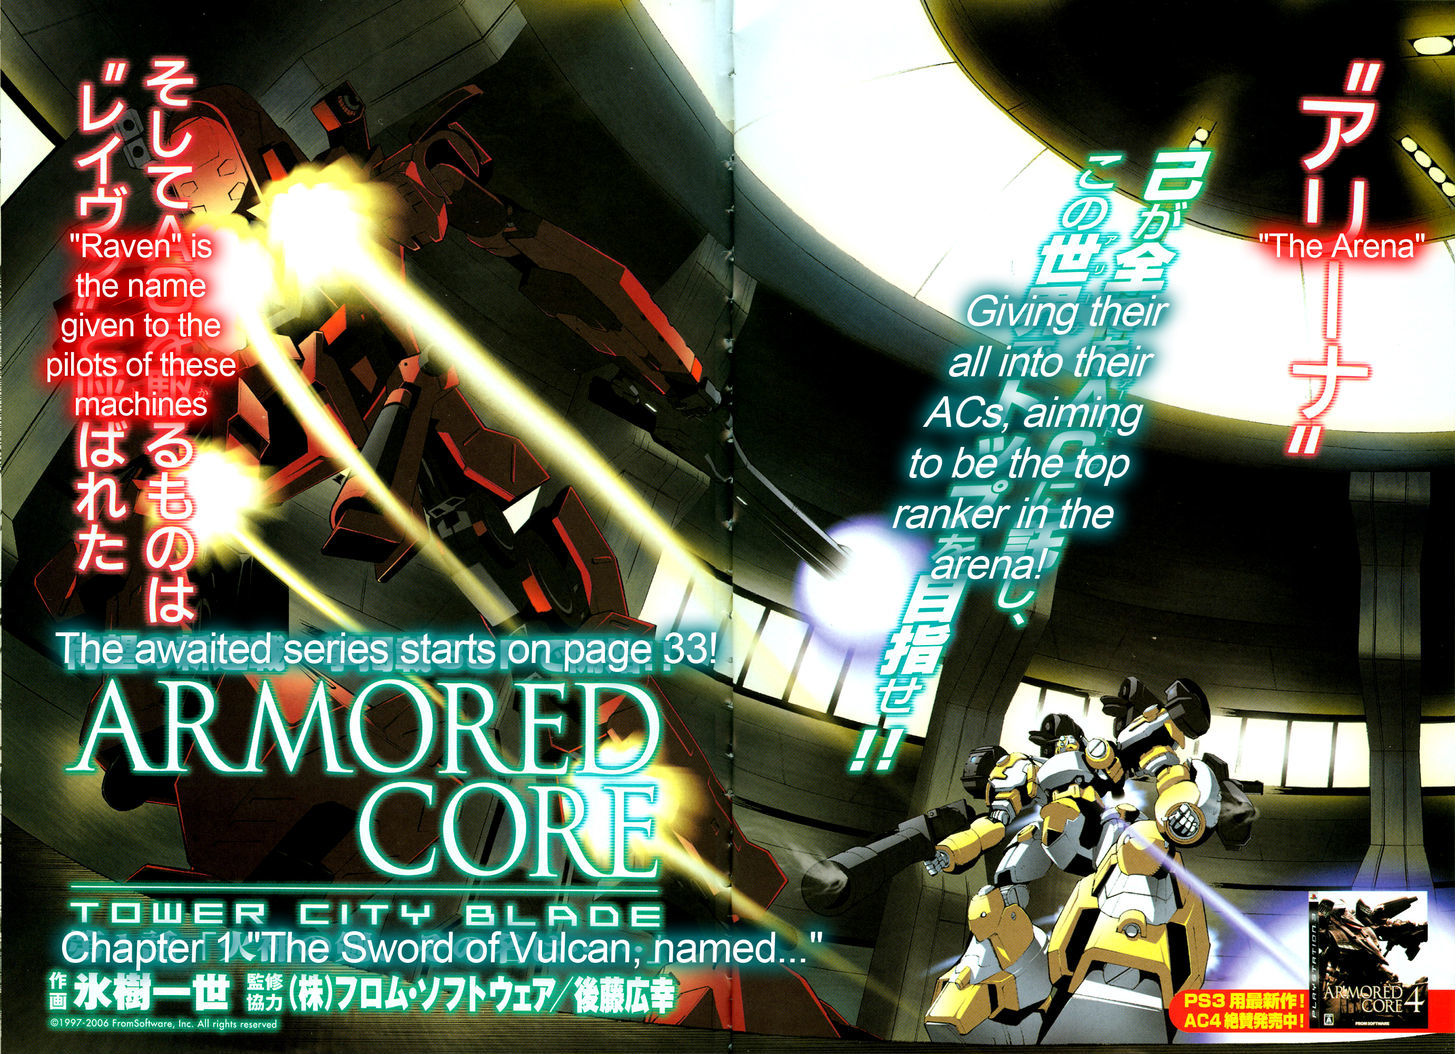 Armored Core - Tower City Blade Chapter 1 #5